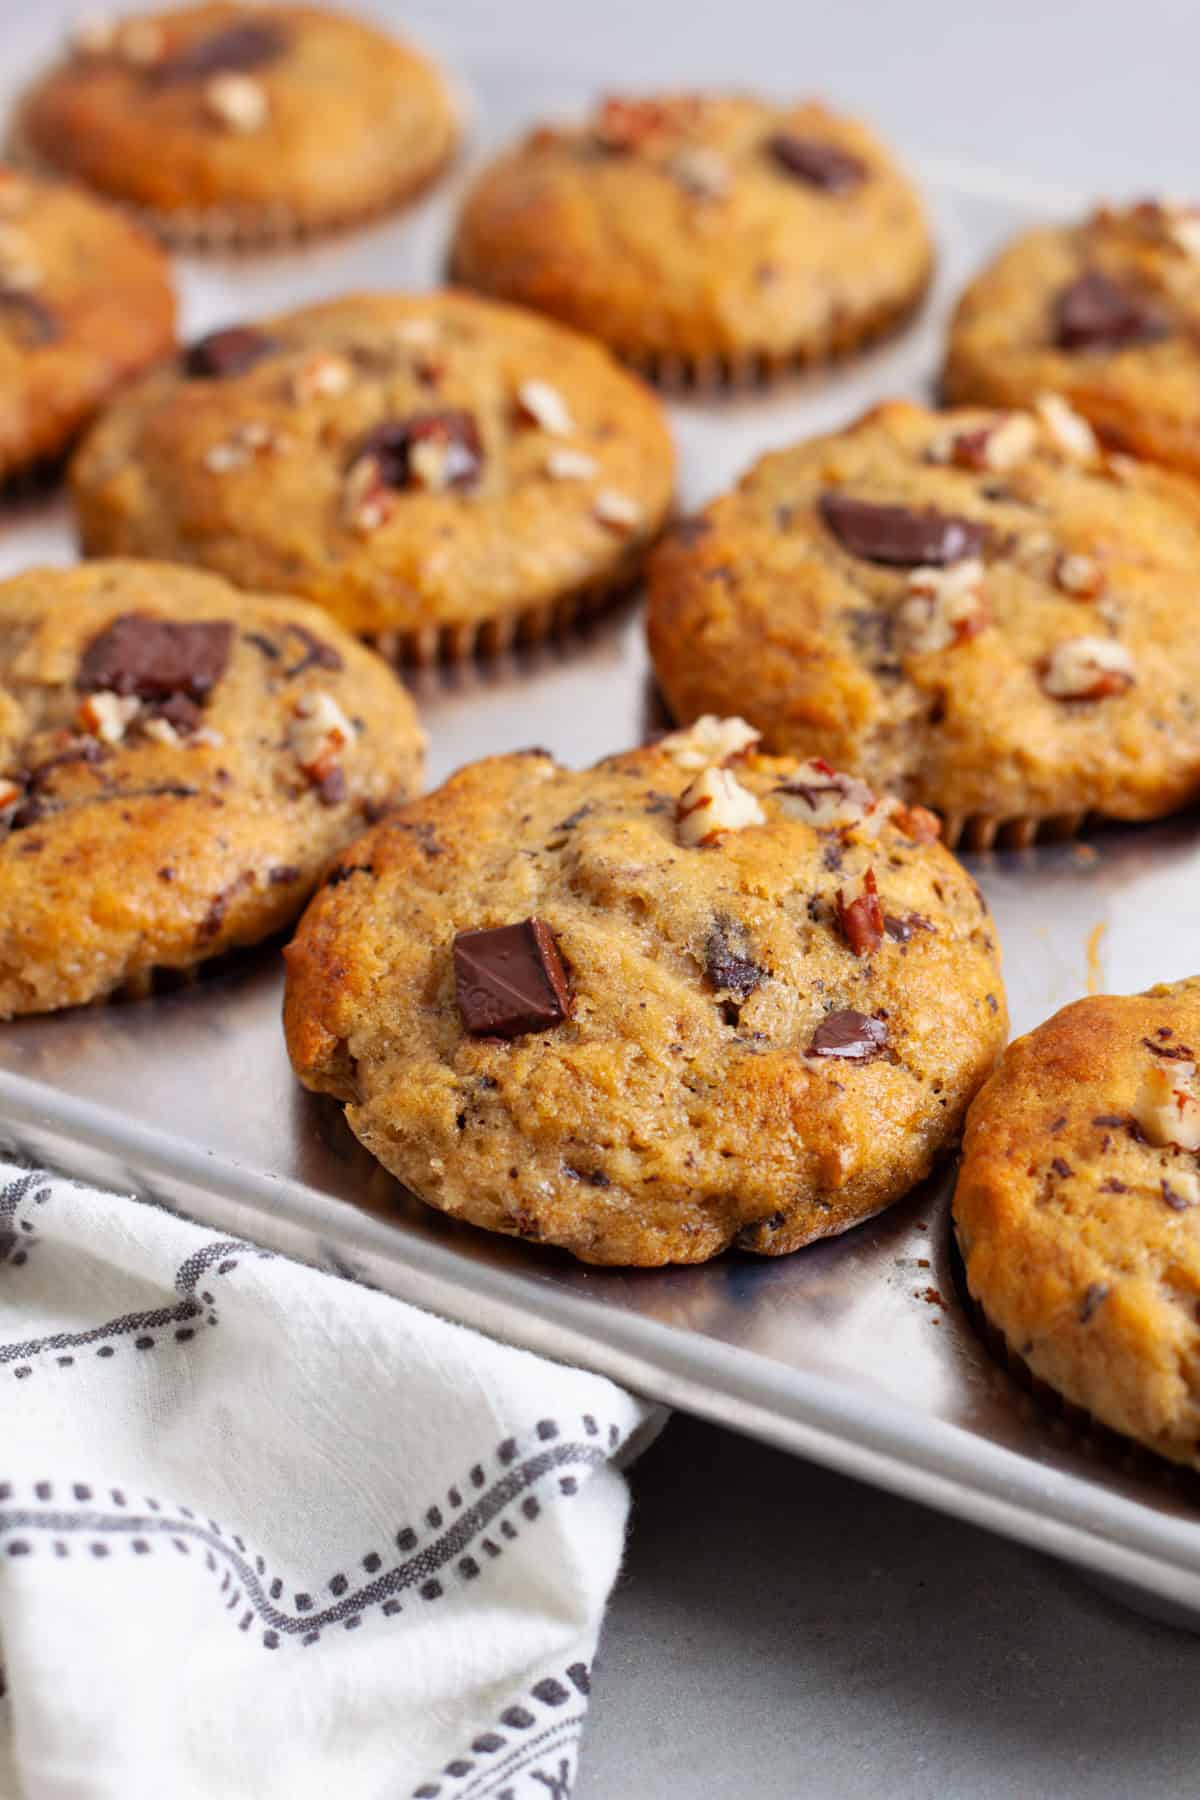 A muffin tin with golden brown banana chocolate chunk muffins on a gray table.